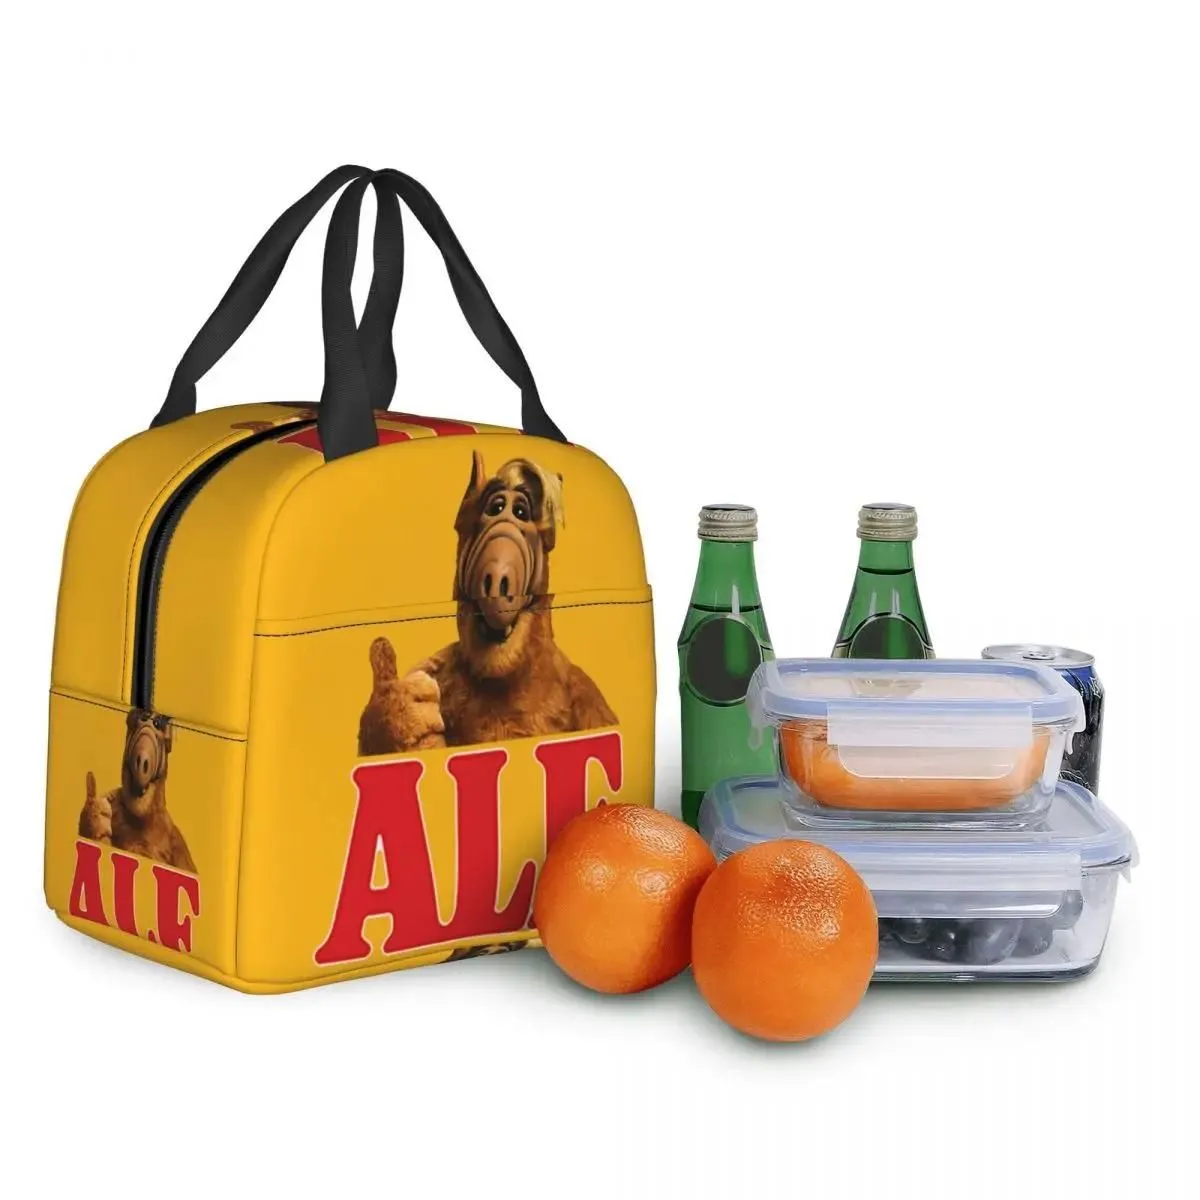 Lines Alf Thumbs Up Lunch Bag Cooler Thermal Insulated Alien Life Form Lunch Box for Women Children School Work Picnic Food Tote Bags